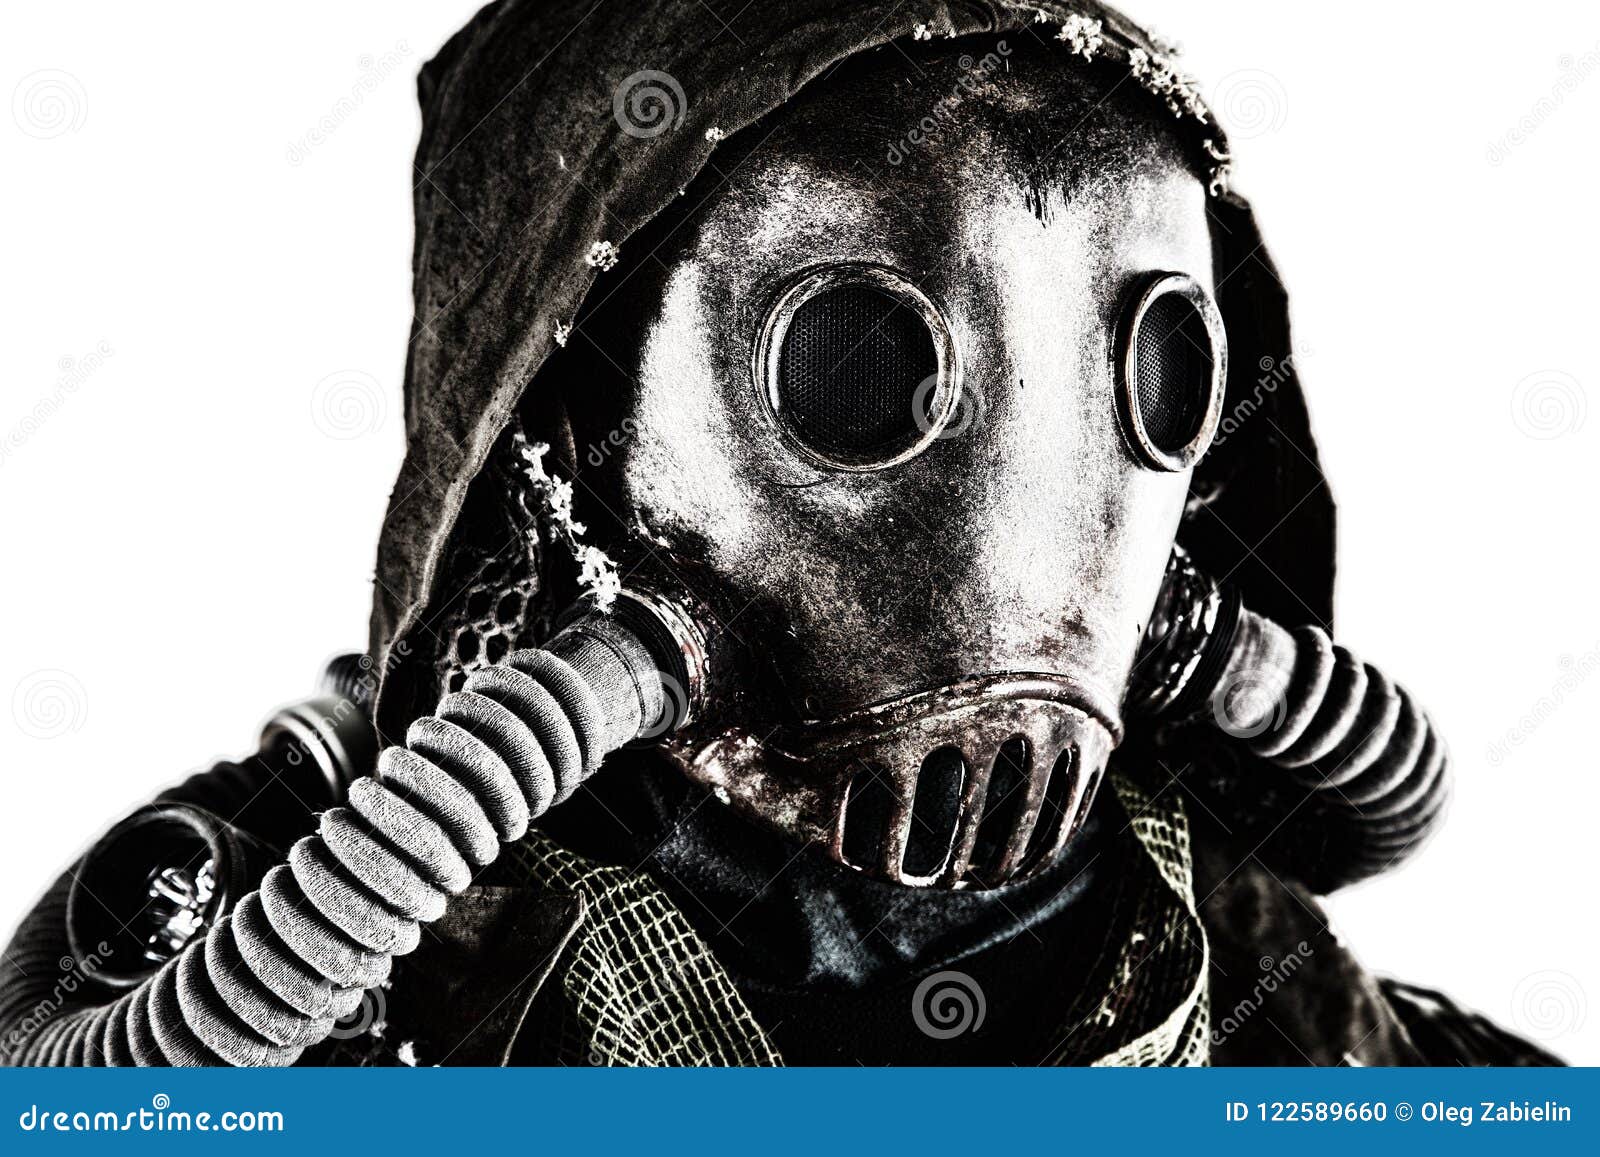 Creepy Gas Mask Pictures